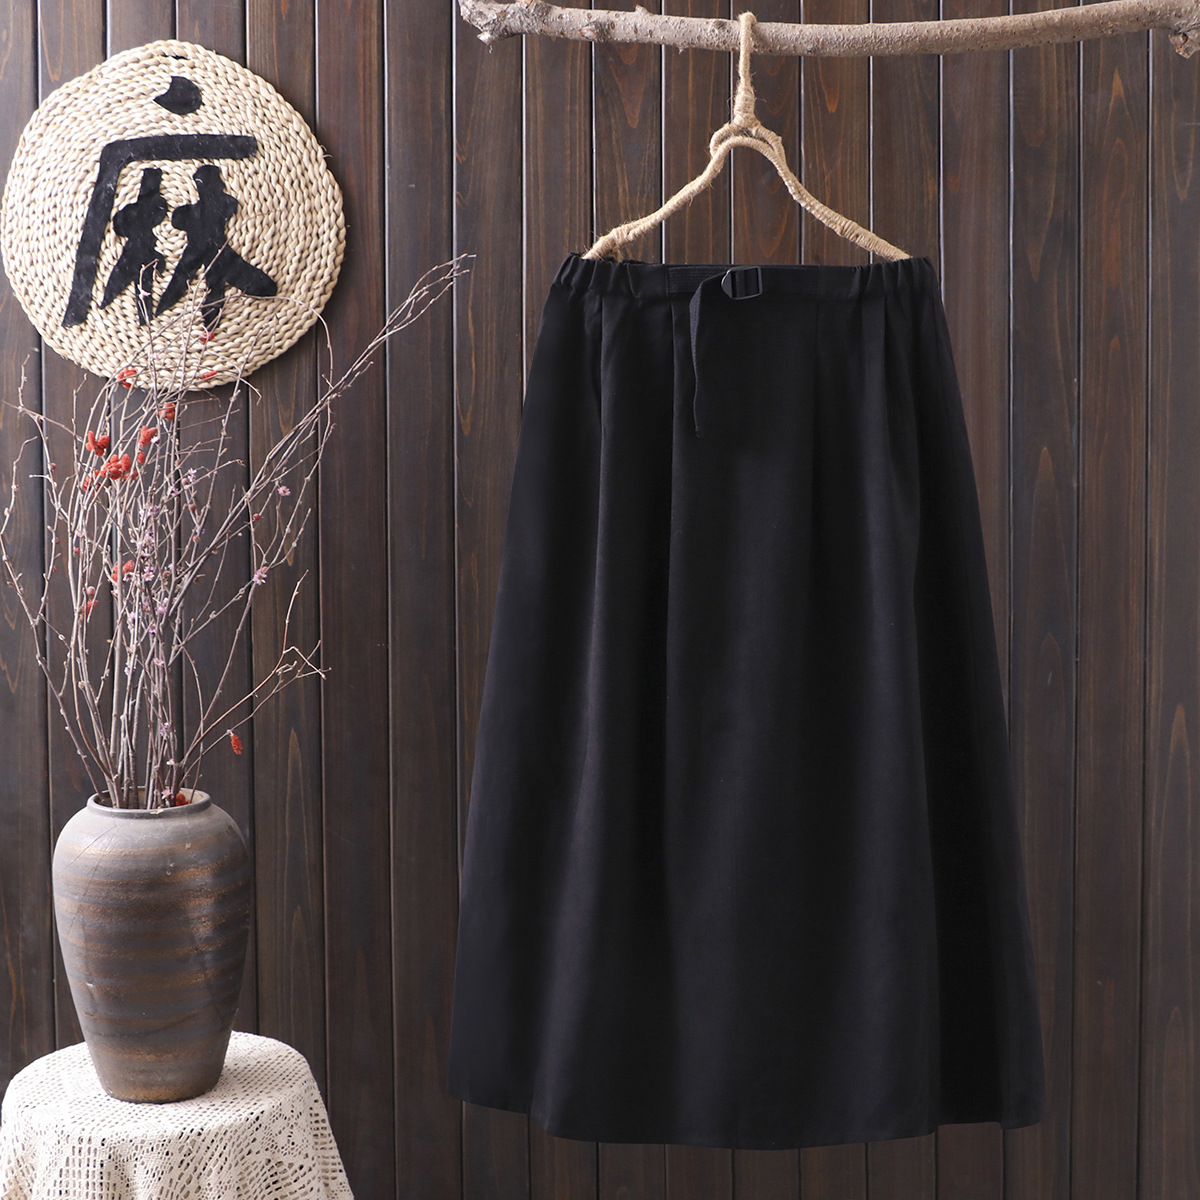 Corduroy,retro, Artistic Style, Tie Up Elastic Skirt, Women's Long Casual A-line Skirt